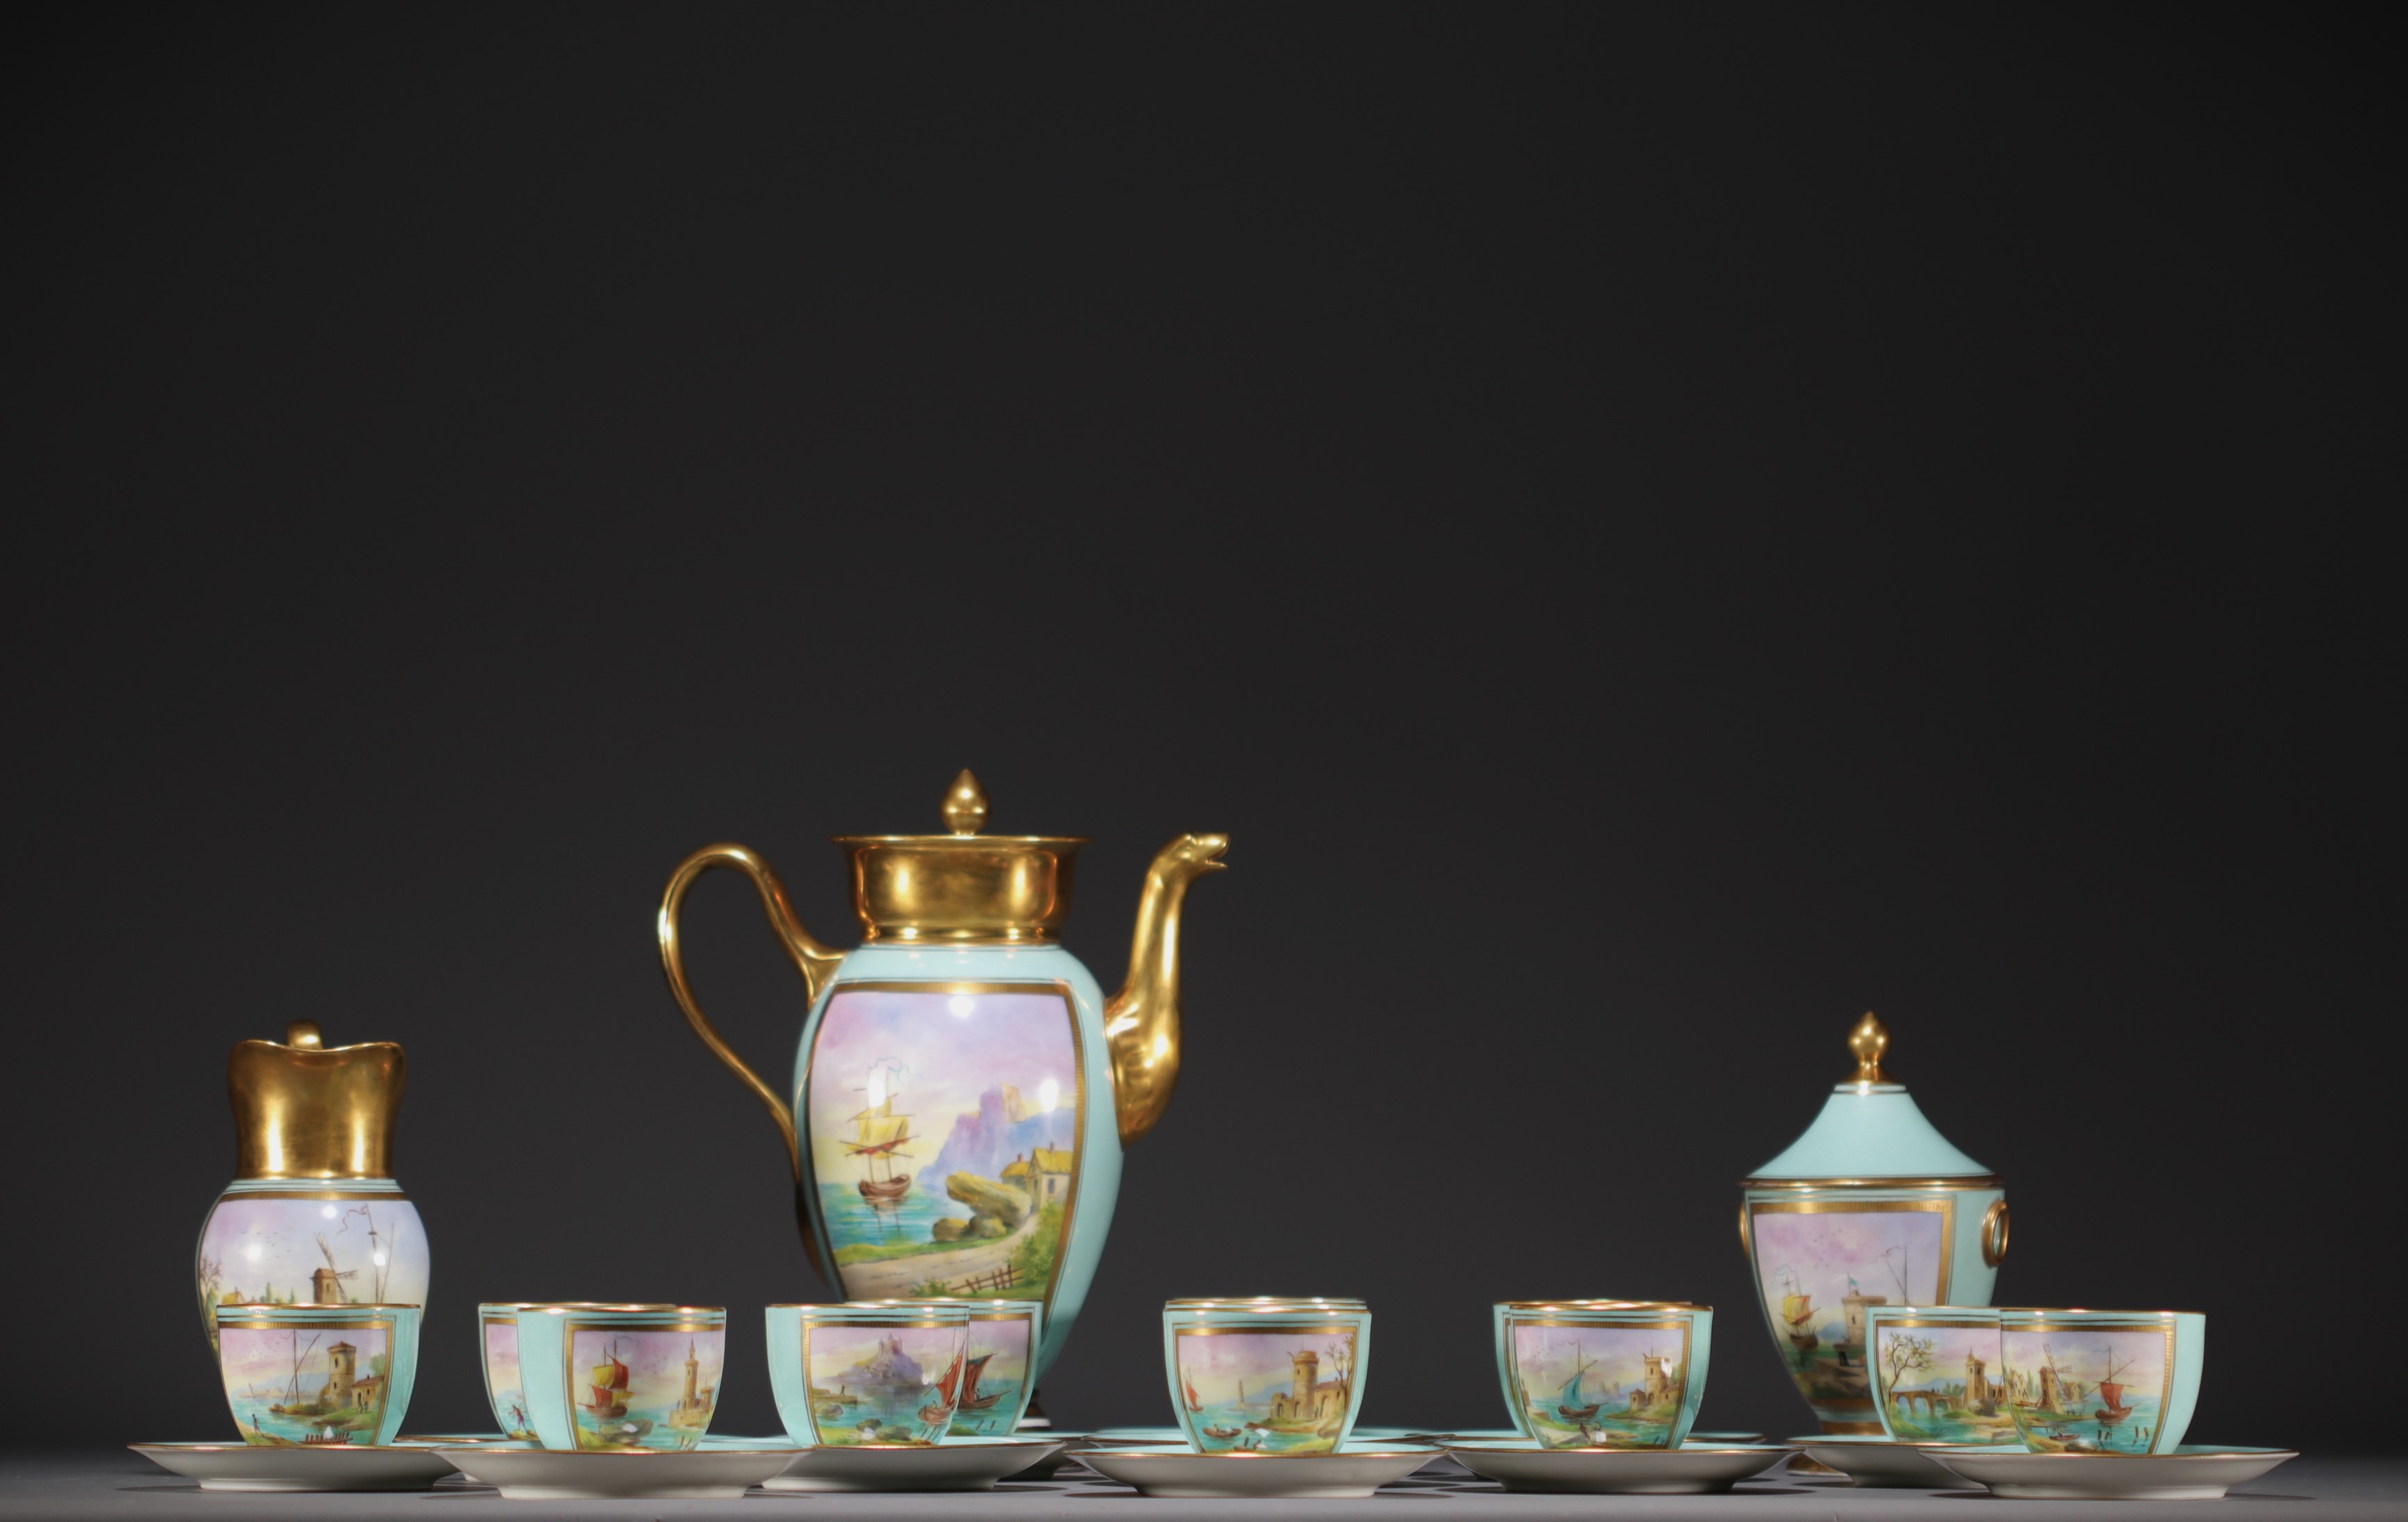 Sevres - A 19th century porcelain coffee service decorated with a marine scene.